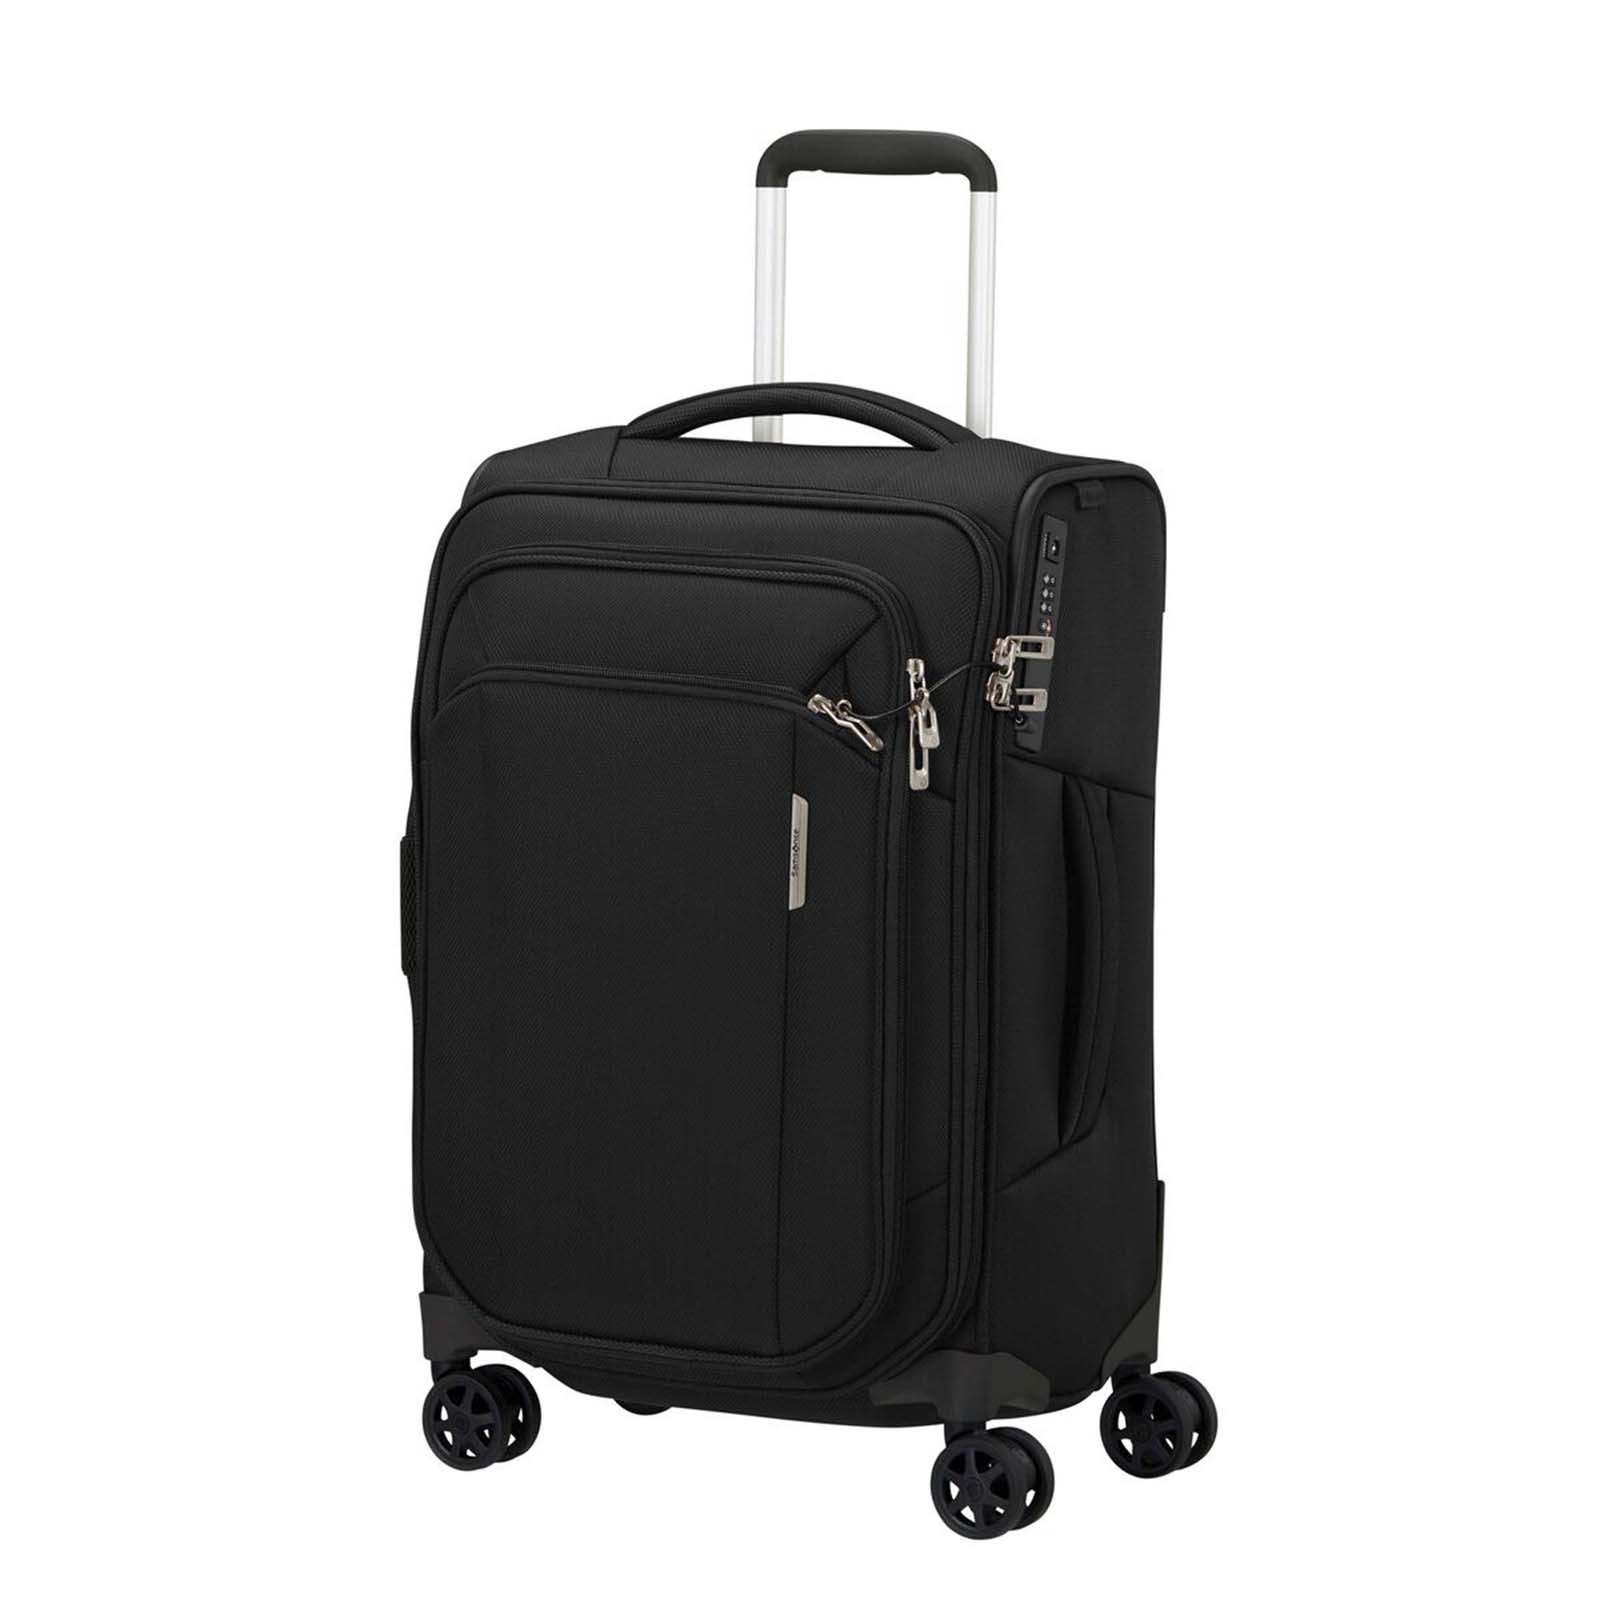 Samsonite-Respark-55cm-Carry-On-Suitcase-Ozone-Black-Front-Angle